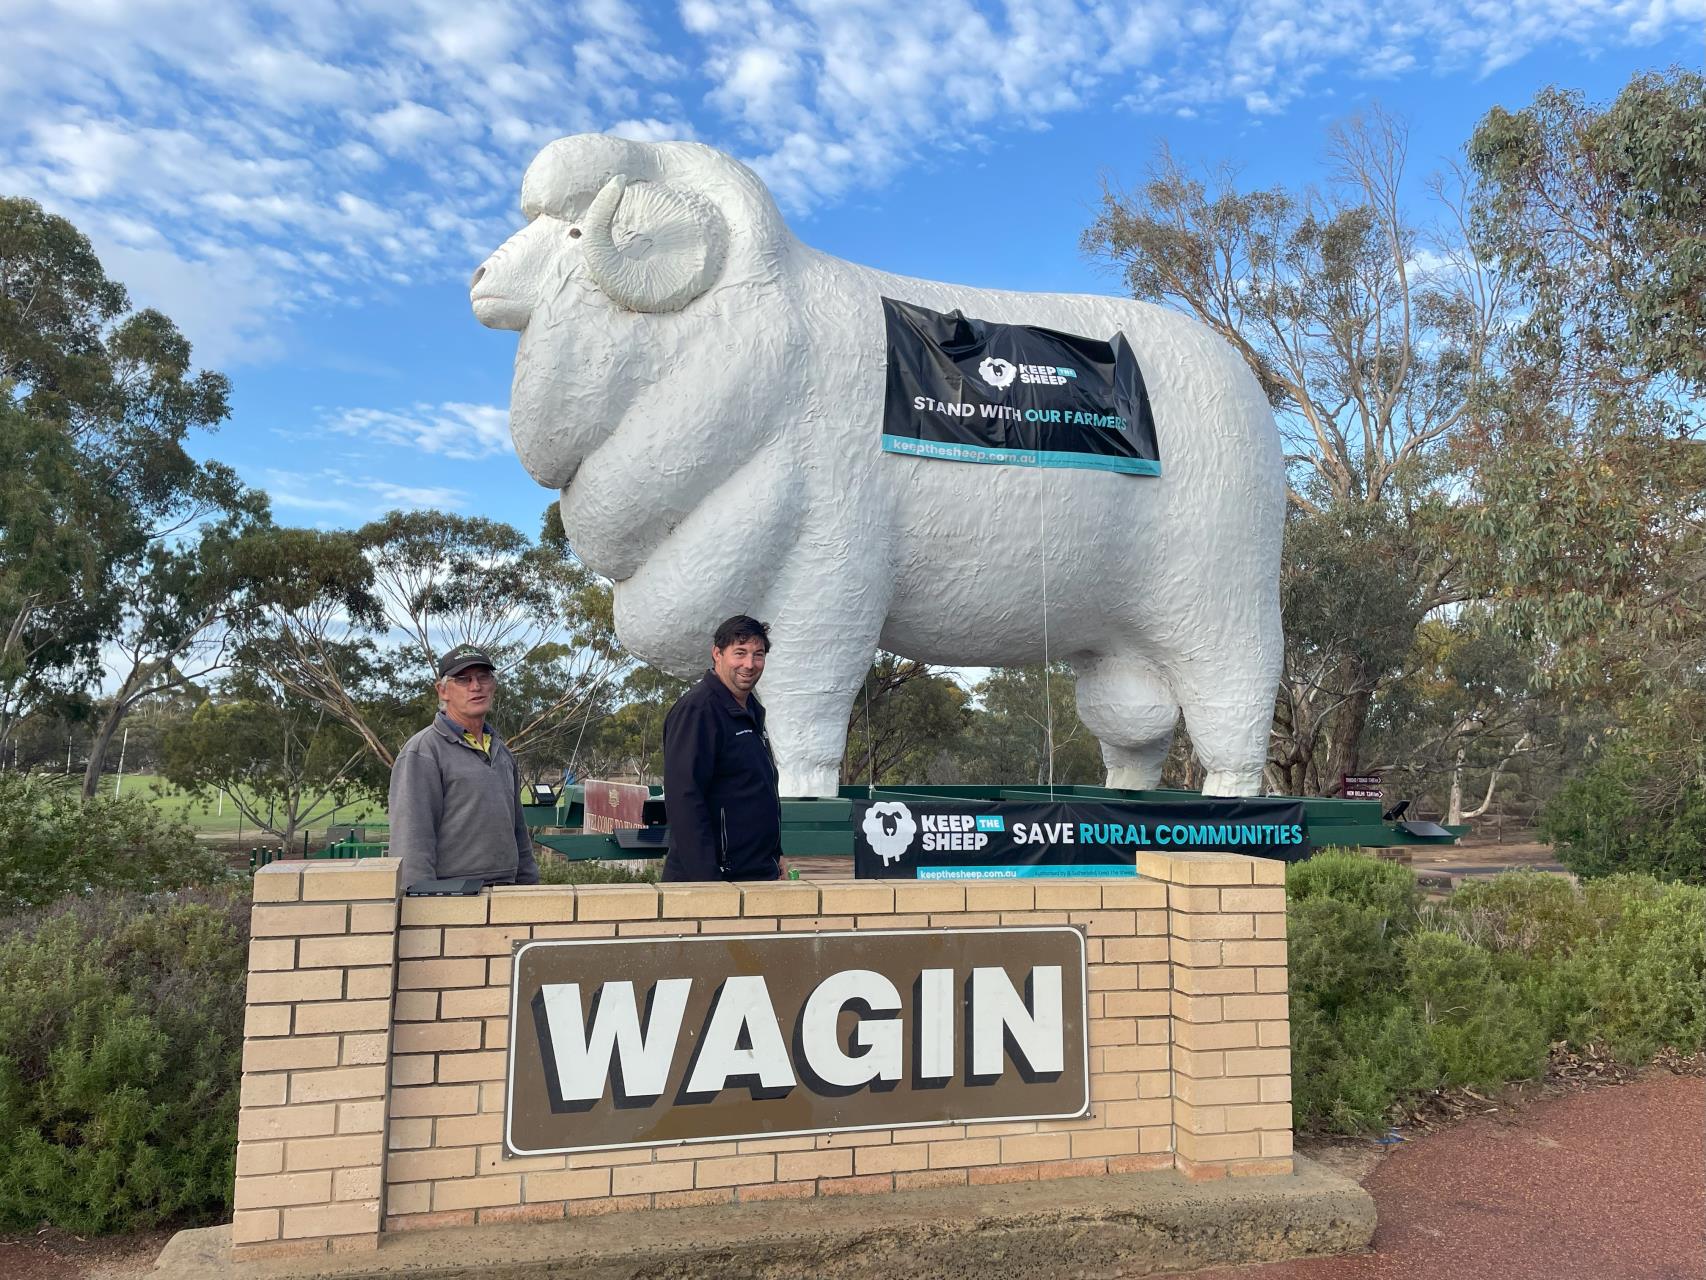 Shire of Wagin: Wagin Shire President Cr Phillip Blight and Cr Wade Longmuir with Wagin’s iconic ram statue ‘Bart’ decorated with the Keep the Sheep Banners.